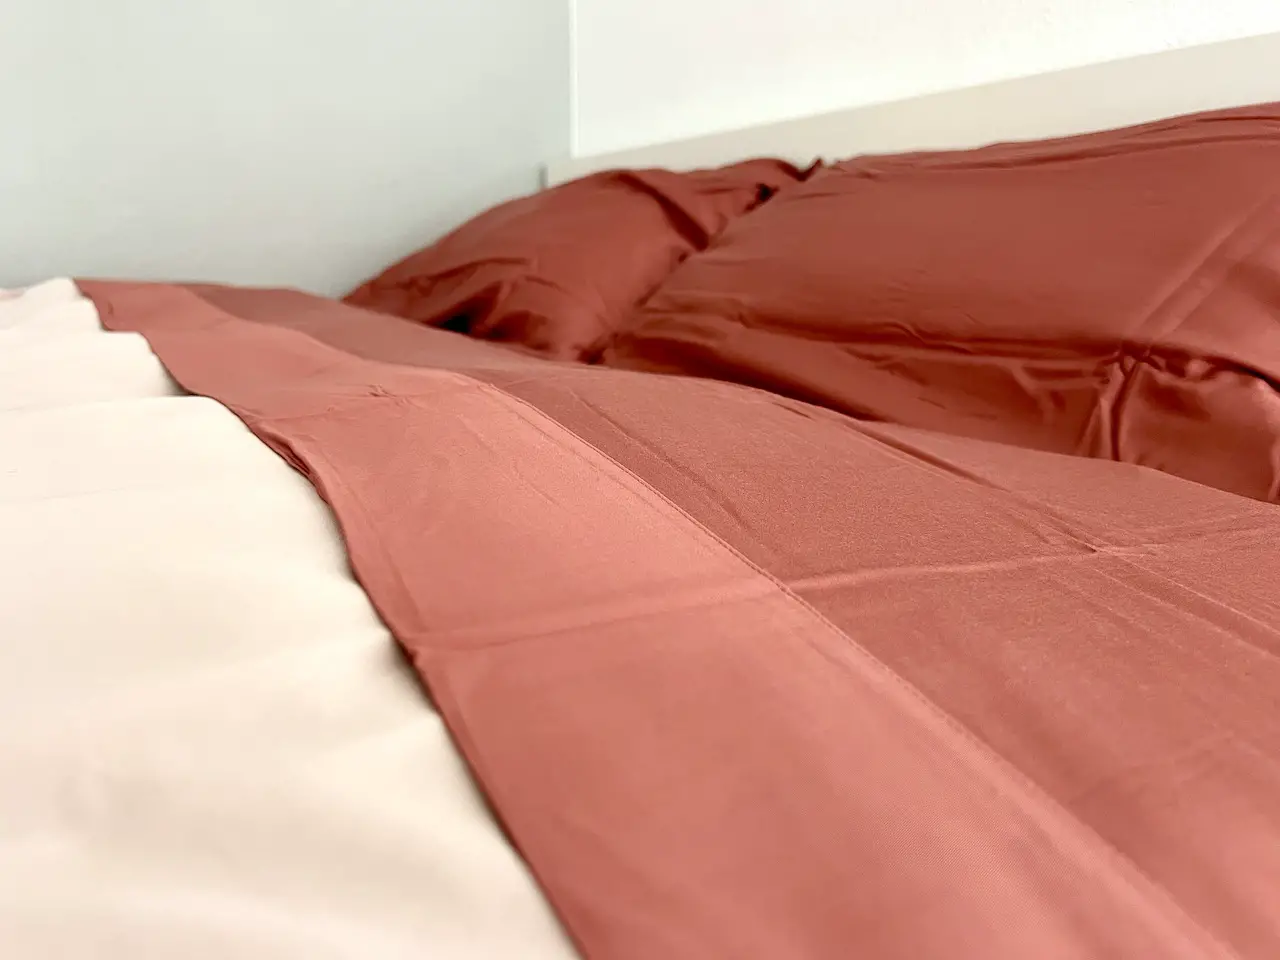 Sunday Citizen Bamboo Bed Sheets and duvet cover